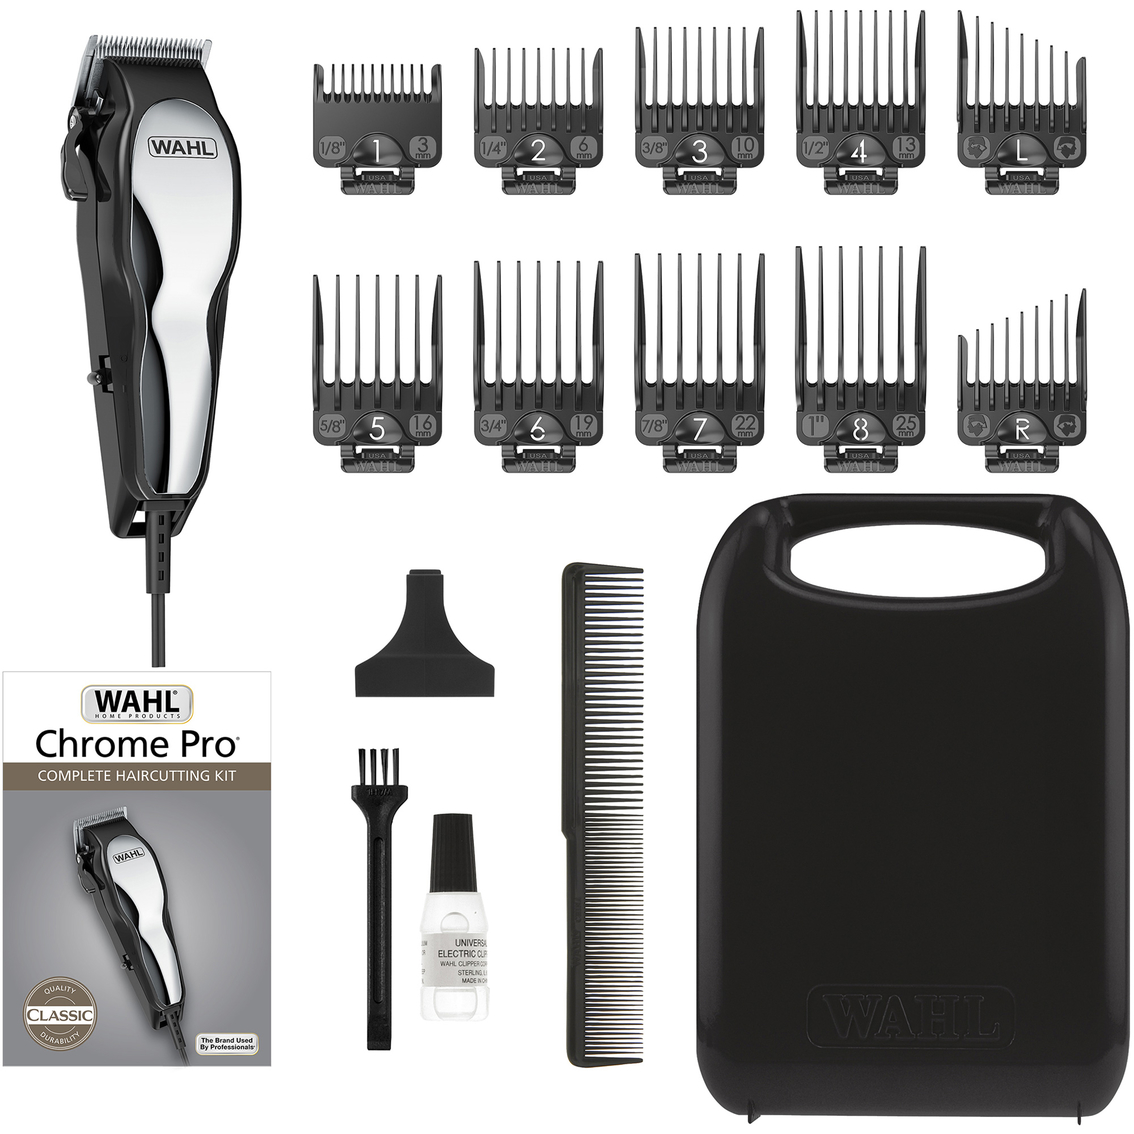 Wahl Chrome Pro Haircutting Clipper Kit - Image 3 of 3